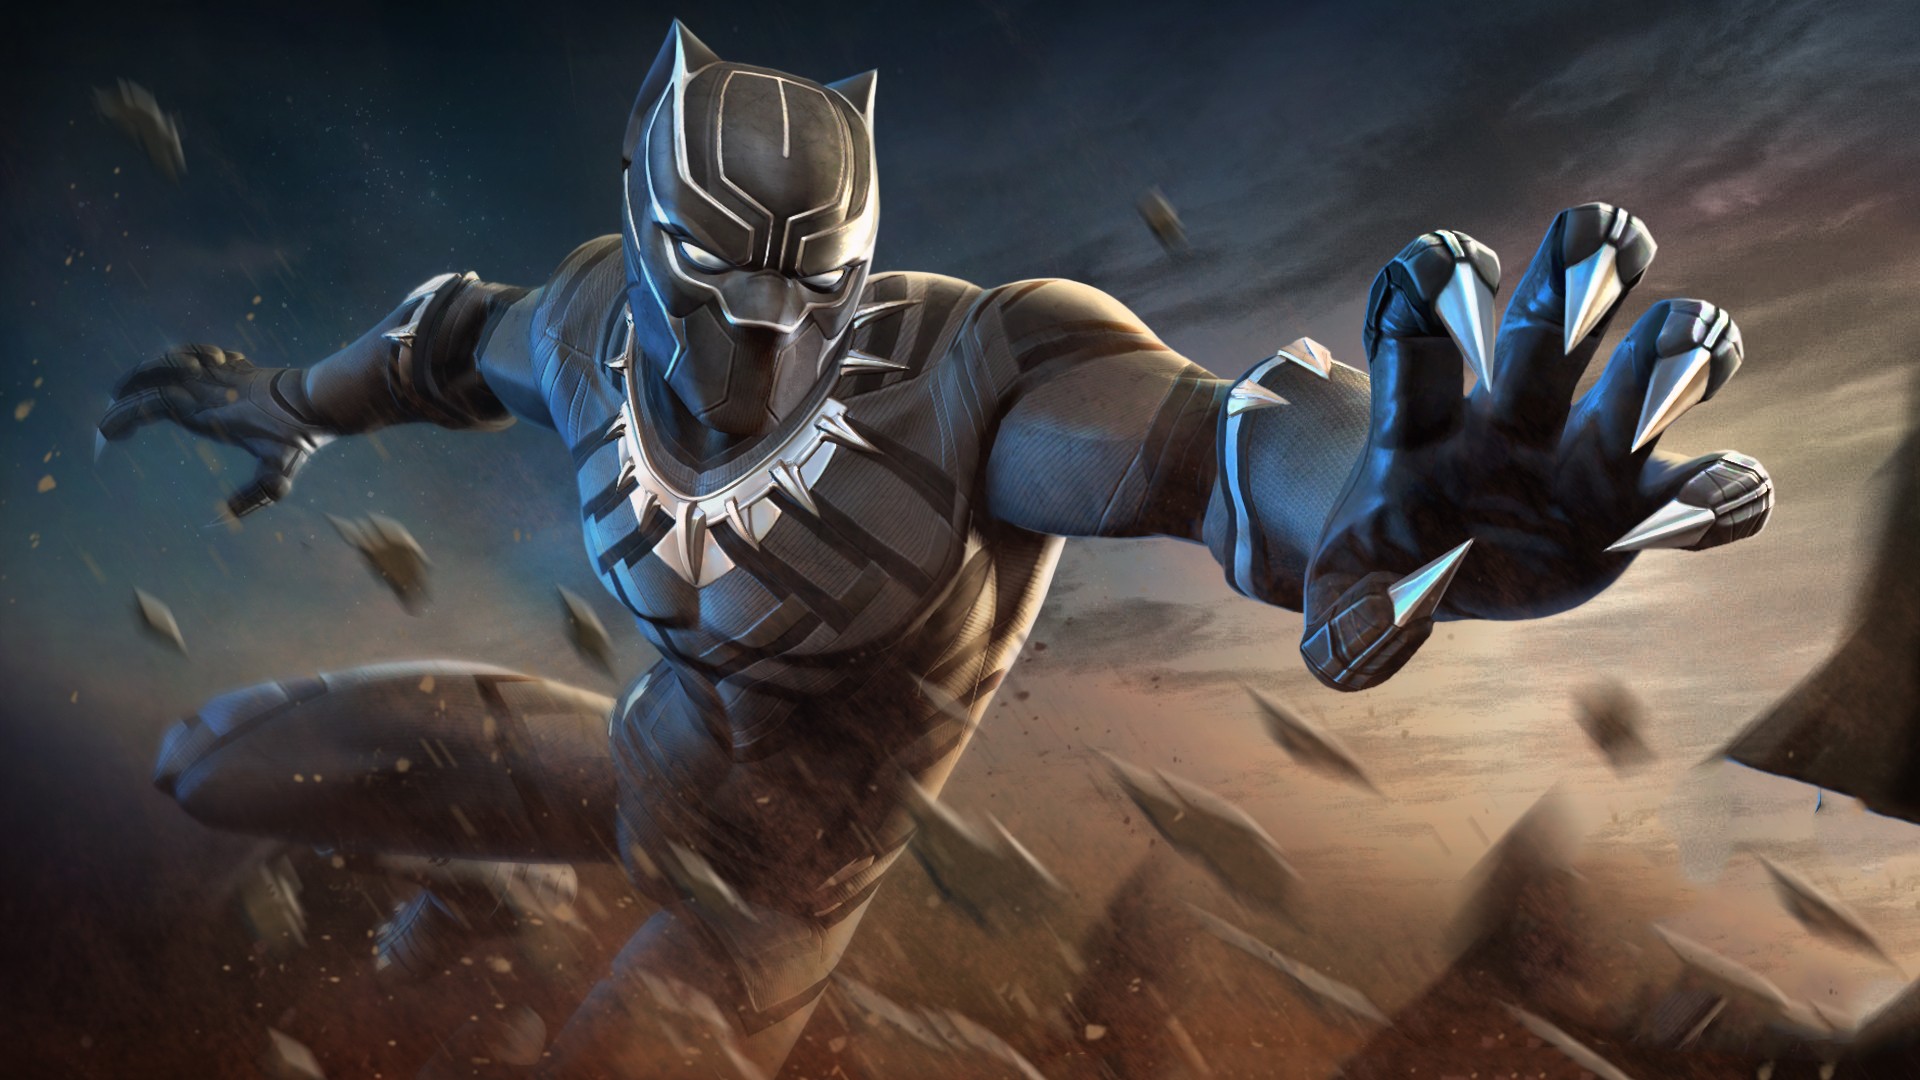 Black Panther Marvel Contest Of Champions - Black Panther Wallpaper Hd 1080p - HD Wallpaper 